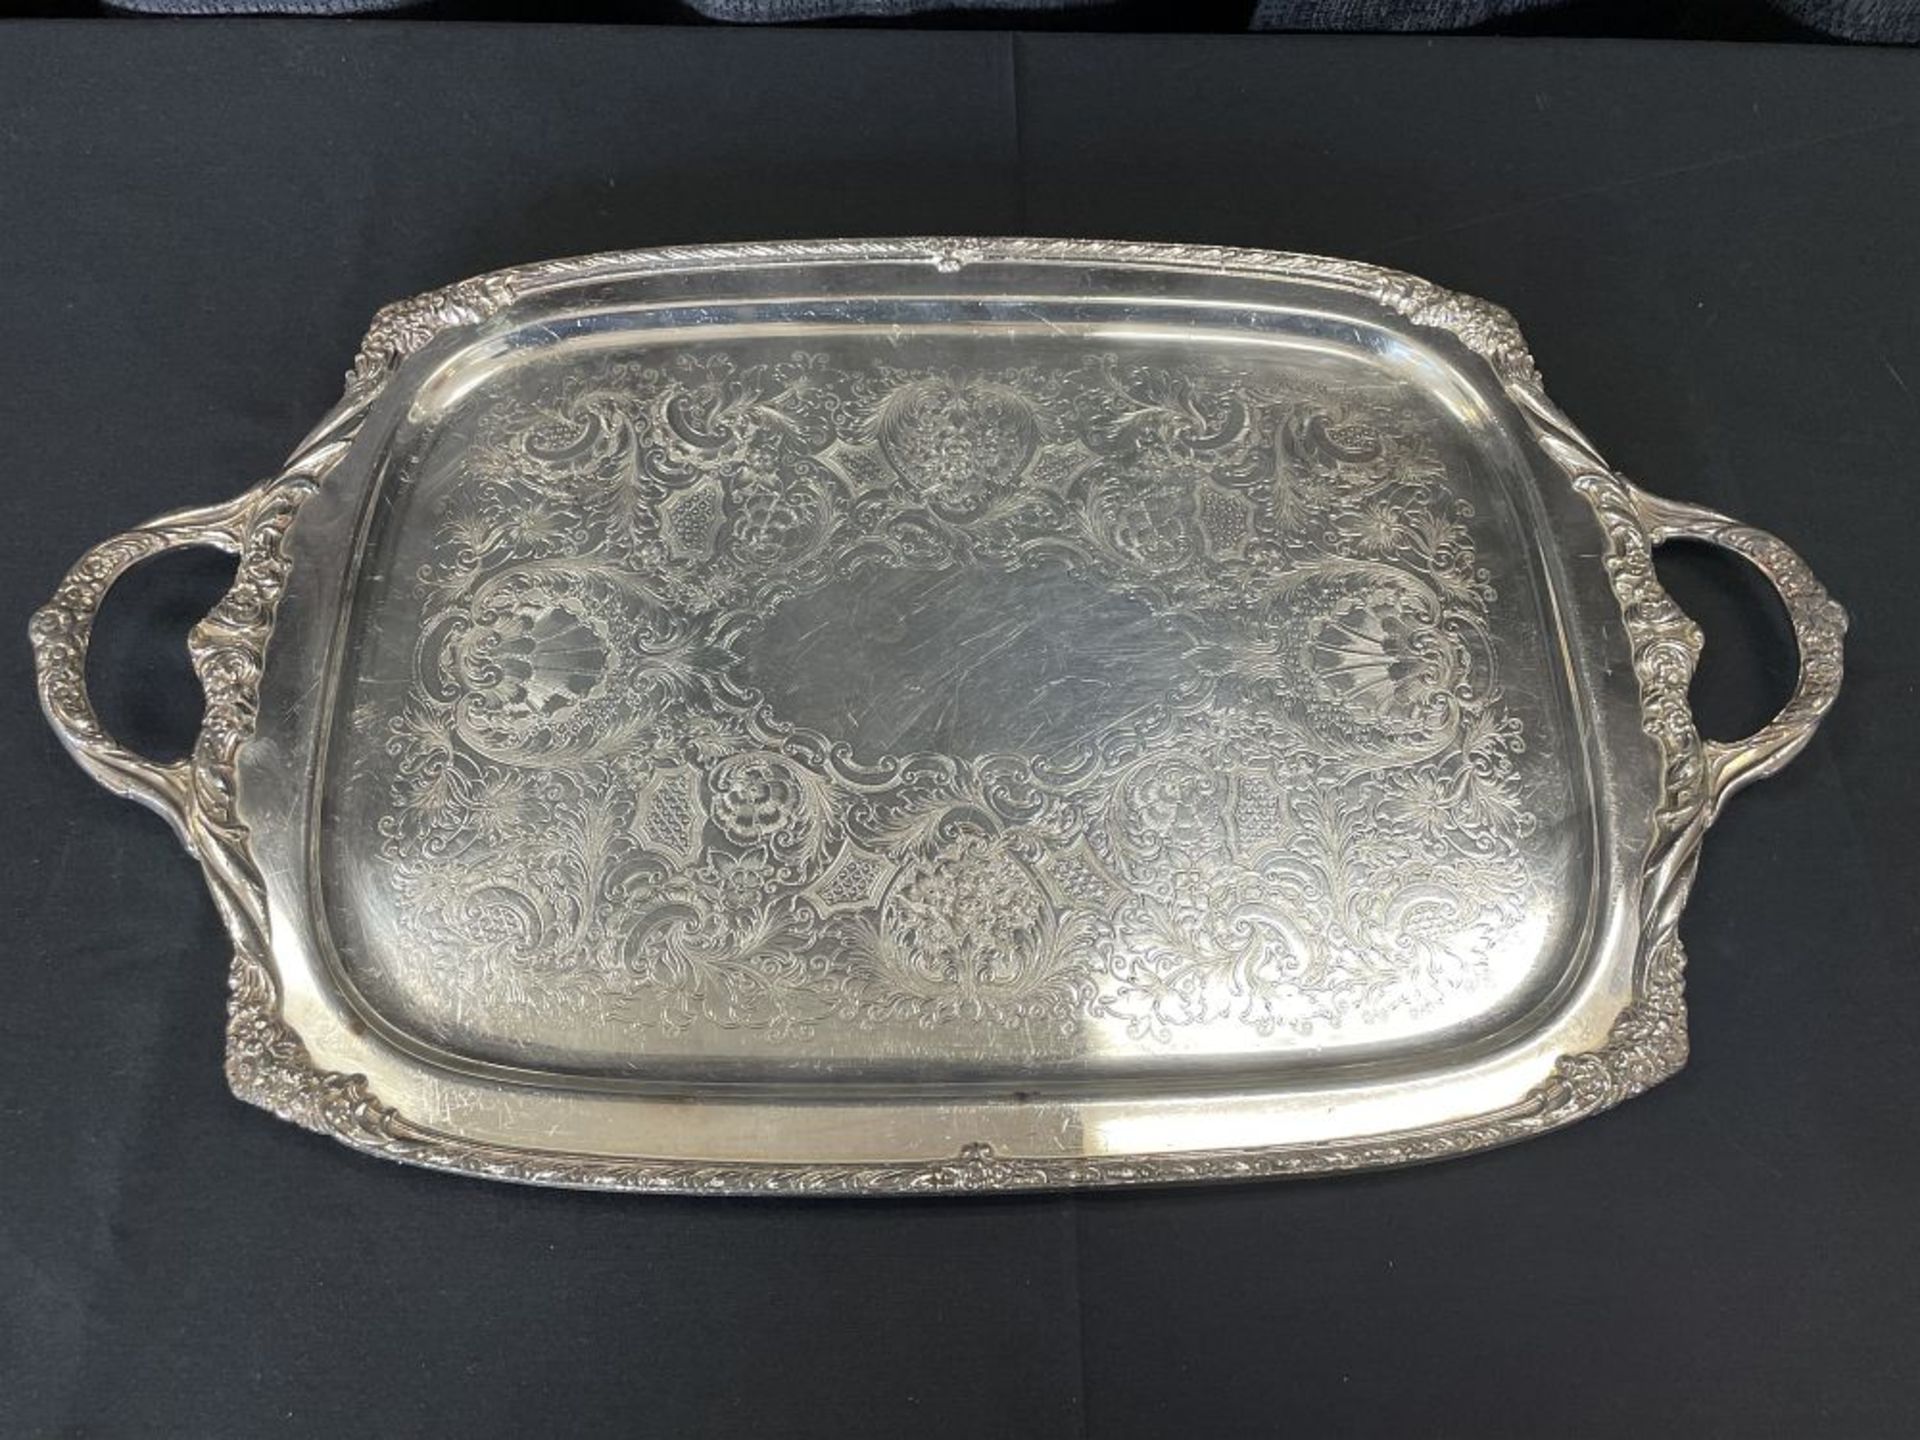 17" x 24" Handled Silver Plate Serving Tray